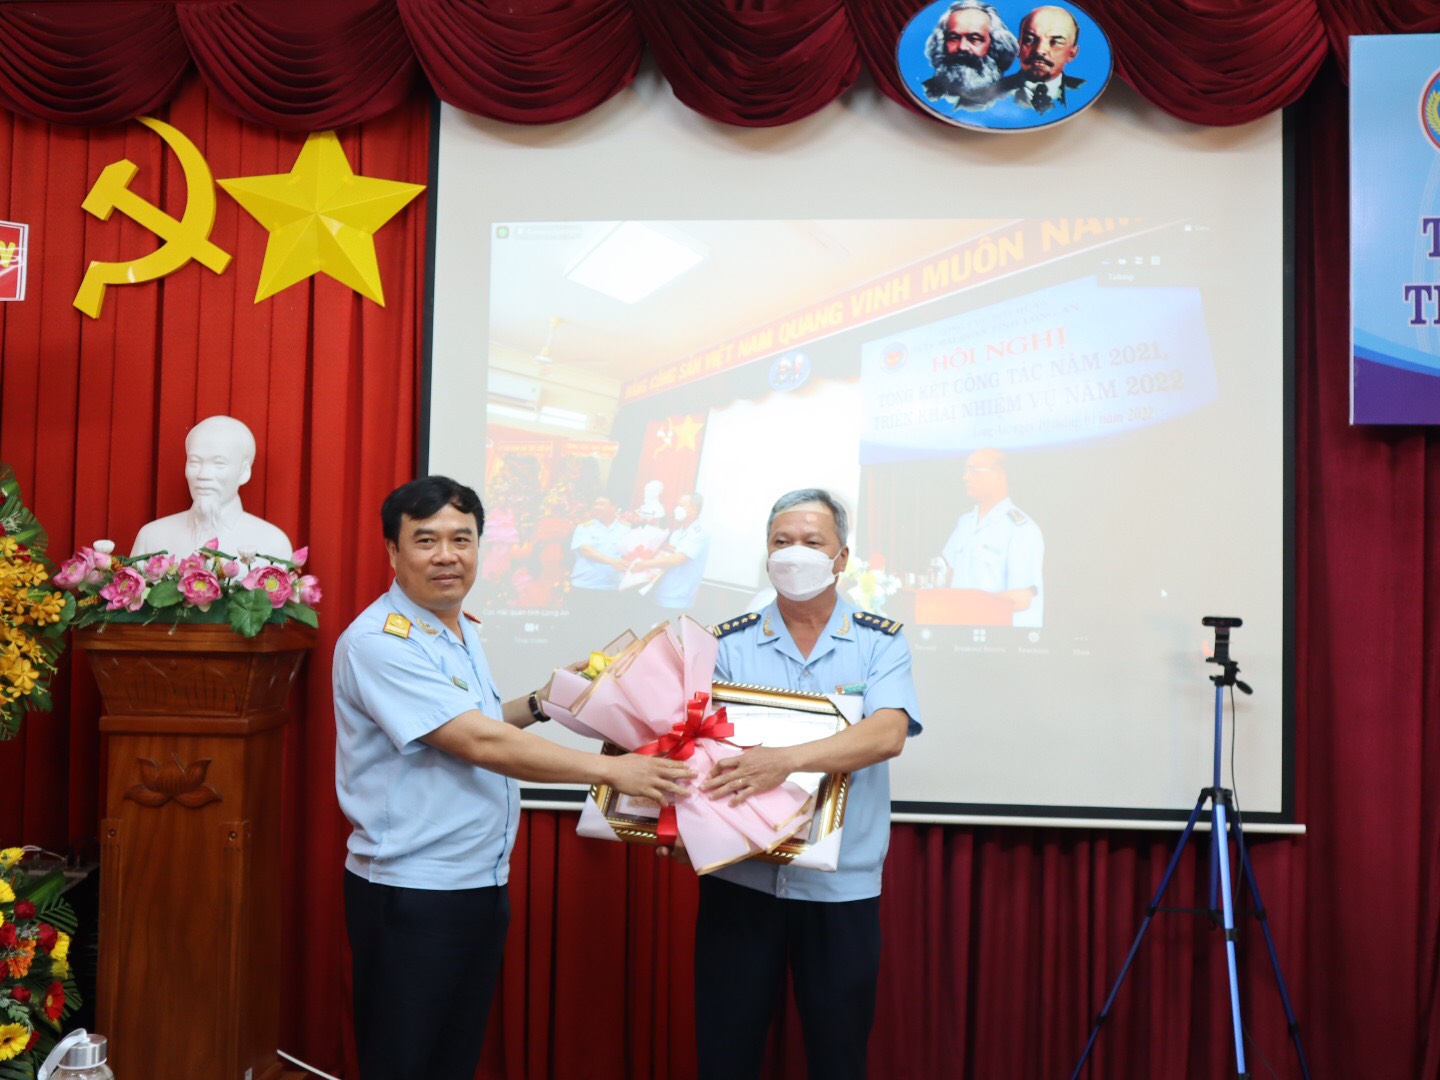 Deputy Director General of the General Customs Department - Nguyen Van Tho (L) awards the Third Class Labor Medal to the Director of Ben Luc Customs Branch - Nguyen Phu Cuong